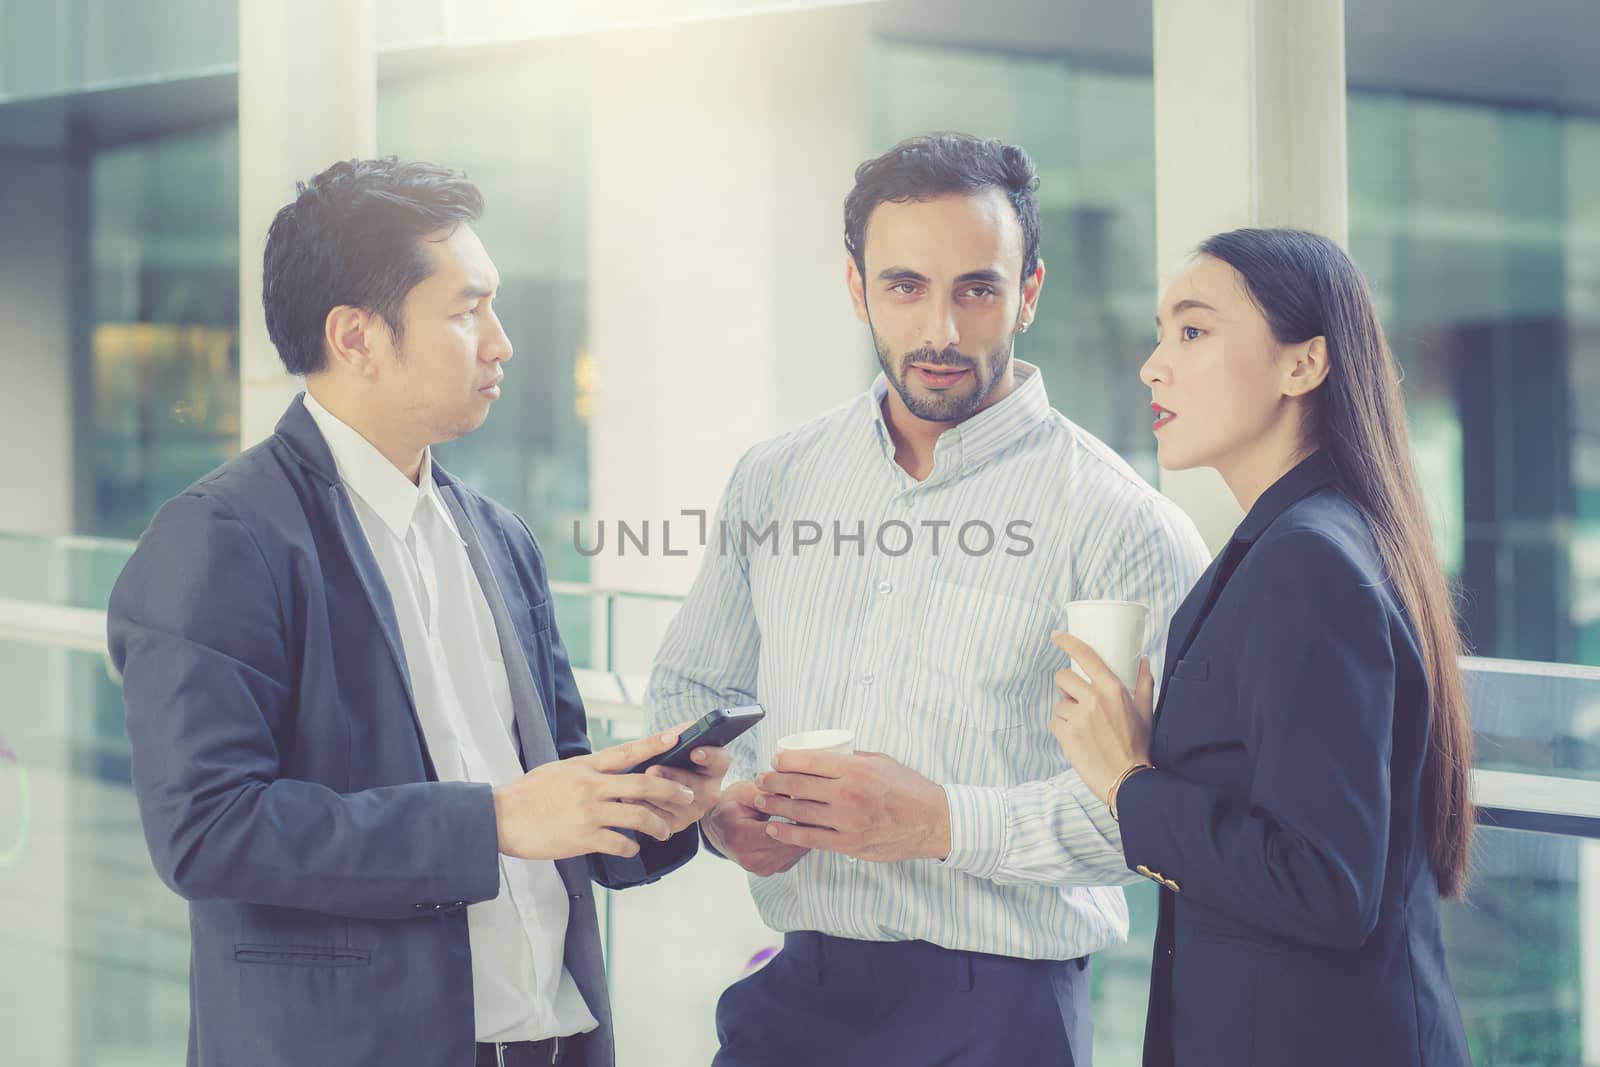 Two handsome young businessmen and lady in classic suits are holding cups of coffee, talking and smiling, standing outside the office building.